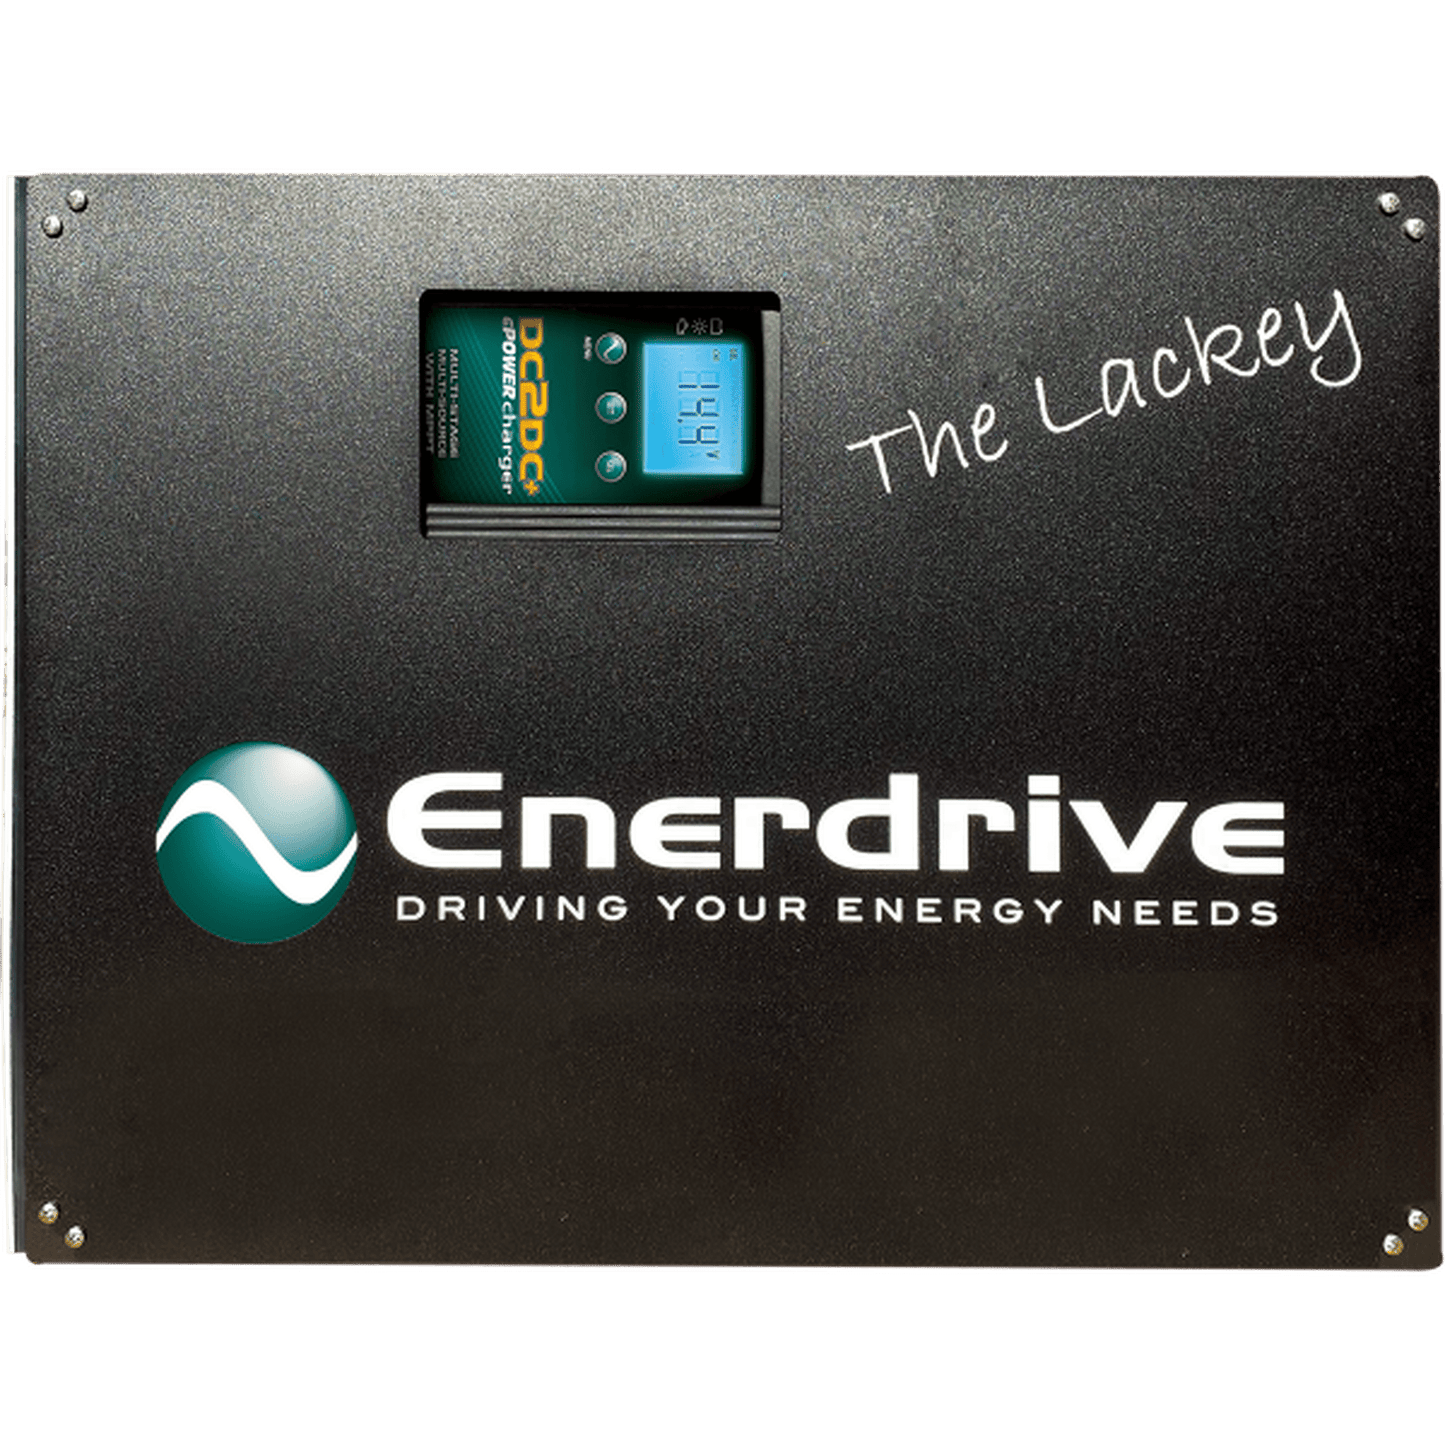 Enerdrive 2000W "The Lackey" Tradie Power System